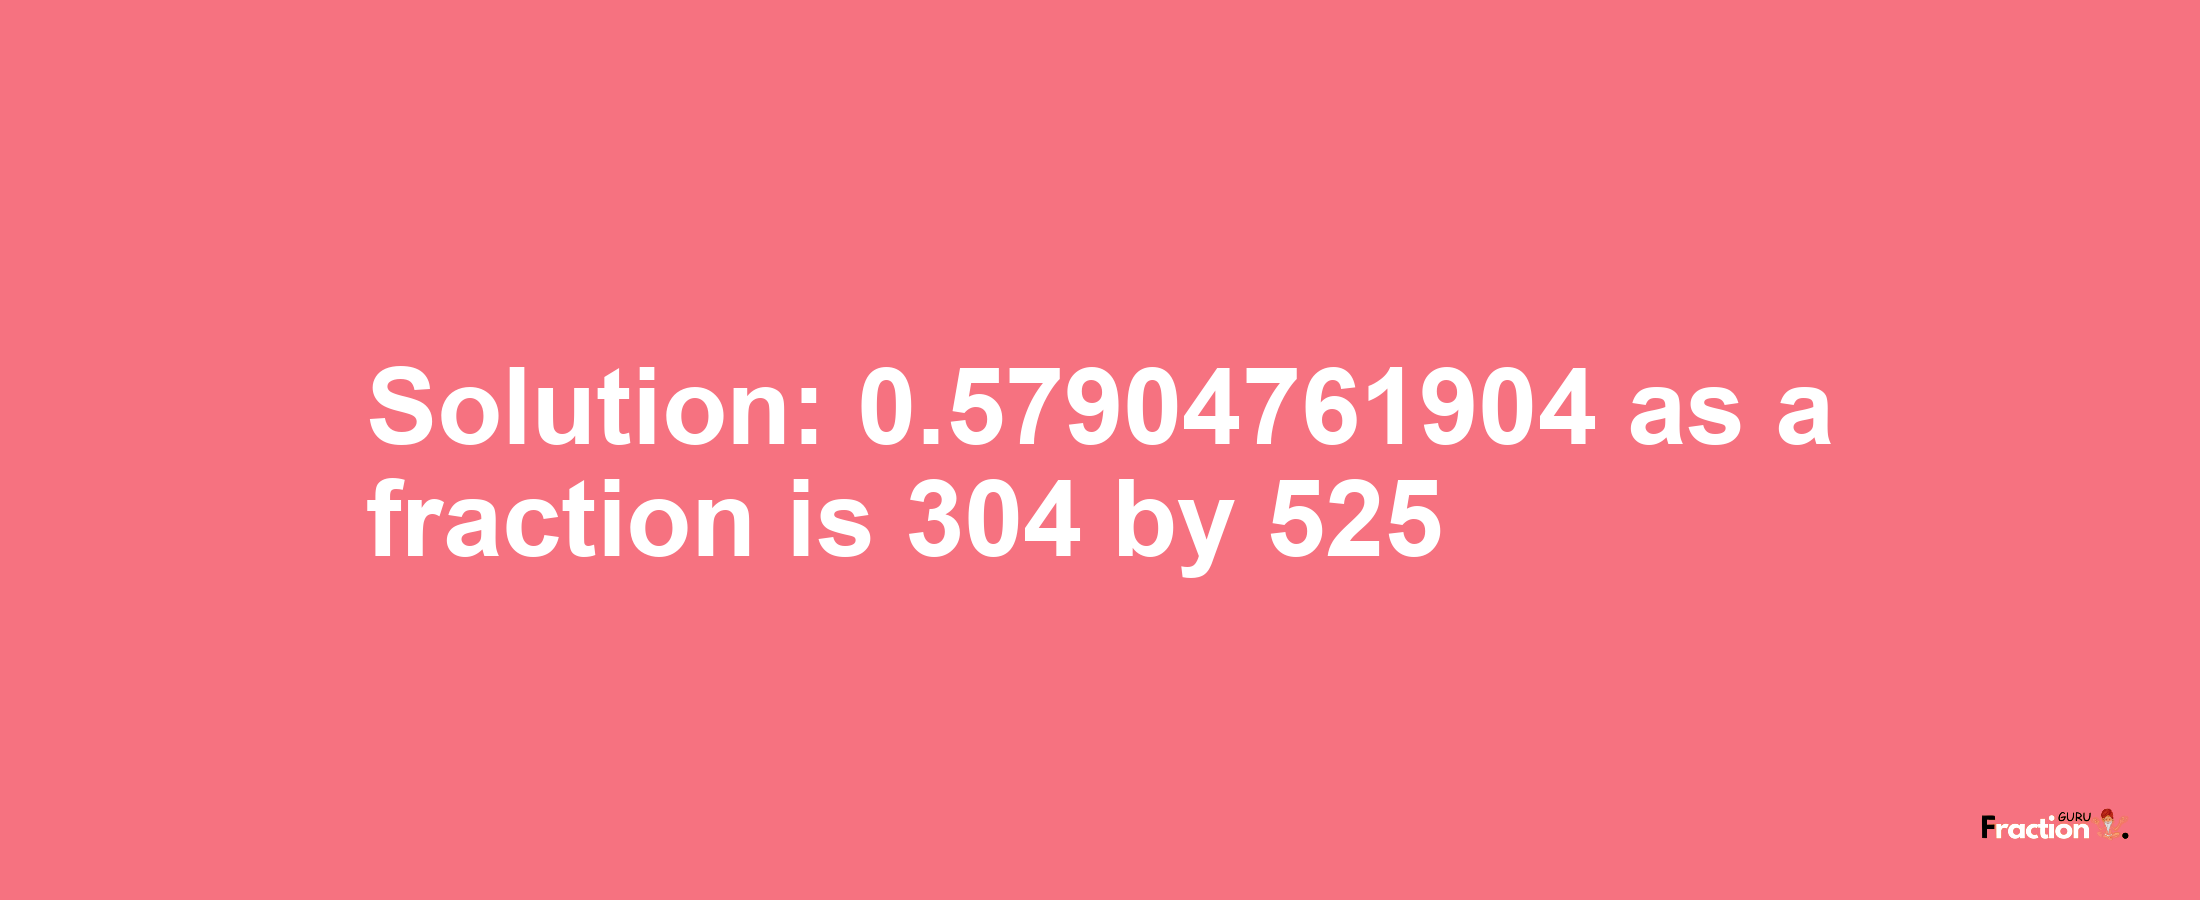 Solution:0.57904761904 as a fraction is 304/525